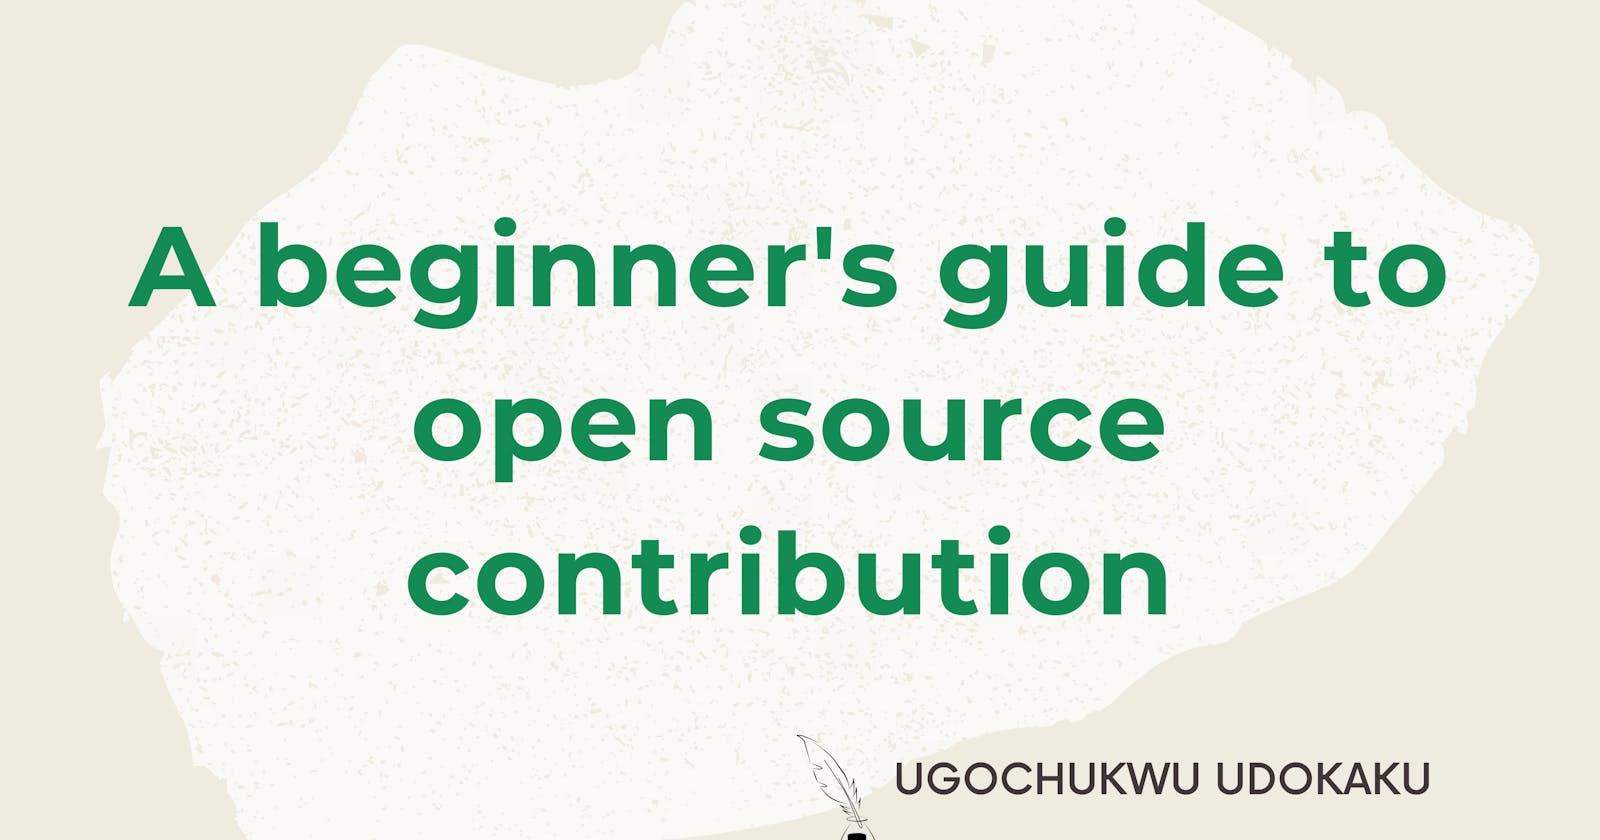 A beginner's guide to open source contribution